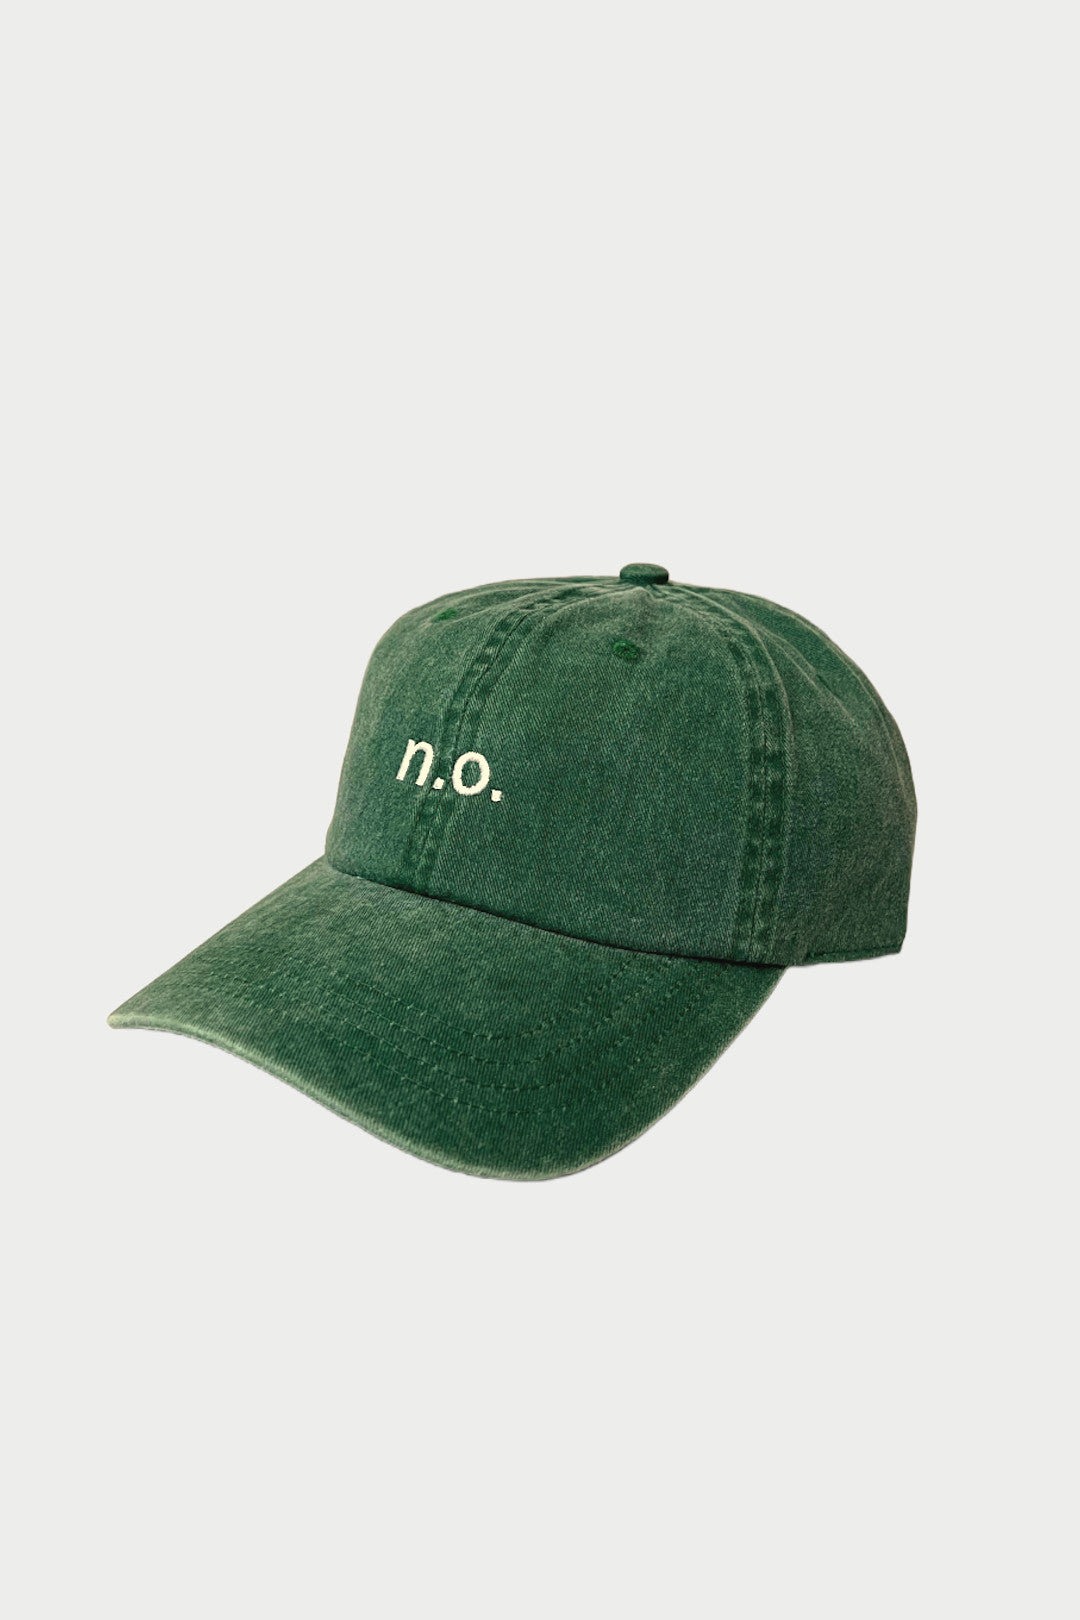 n.o. Hat - Green#color_green